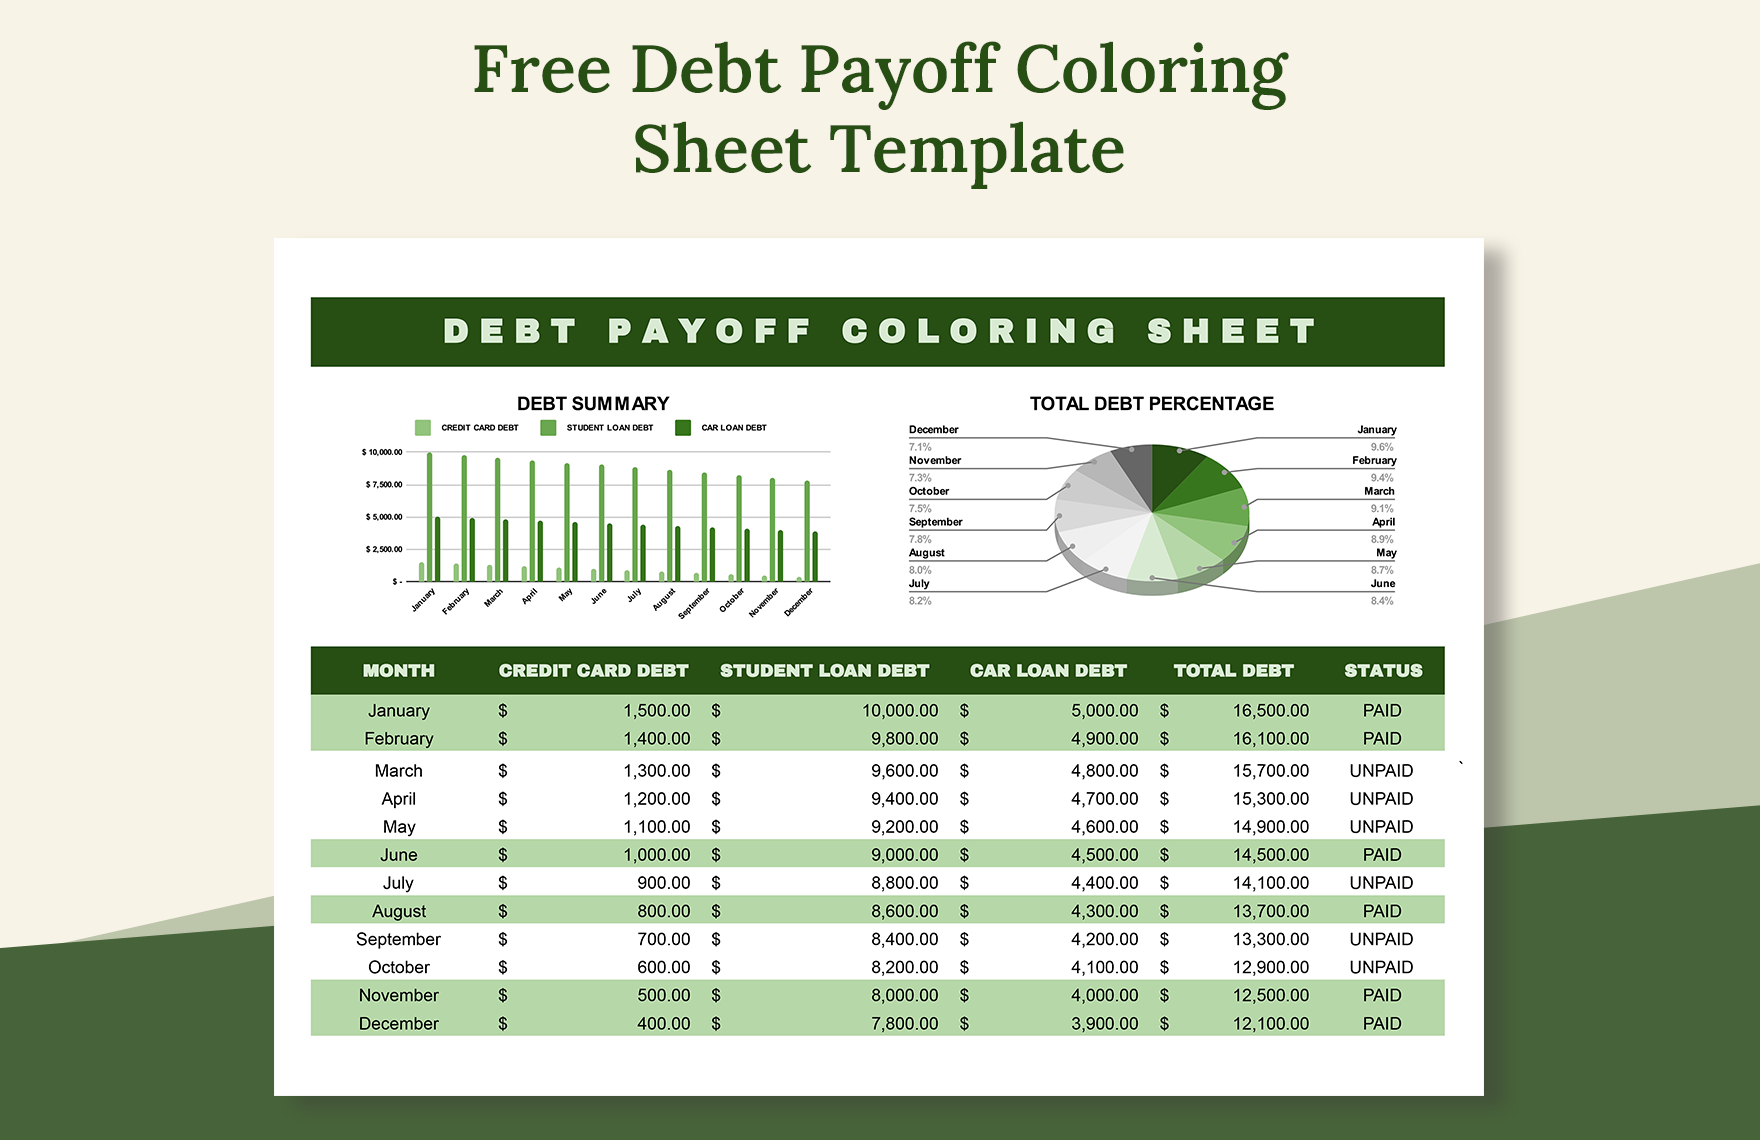 Debt Payoff Coloring Sheet Template in Excel, Google Sheets